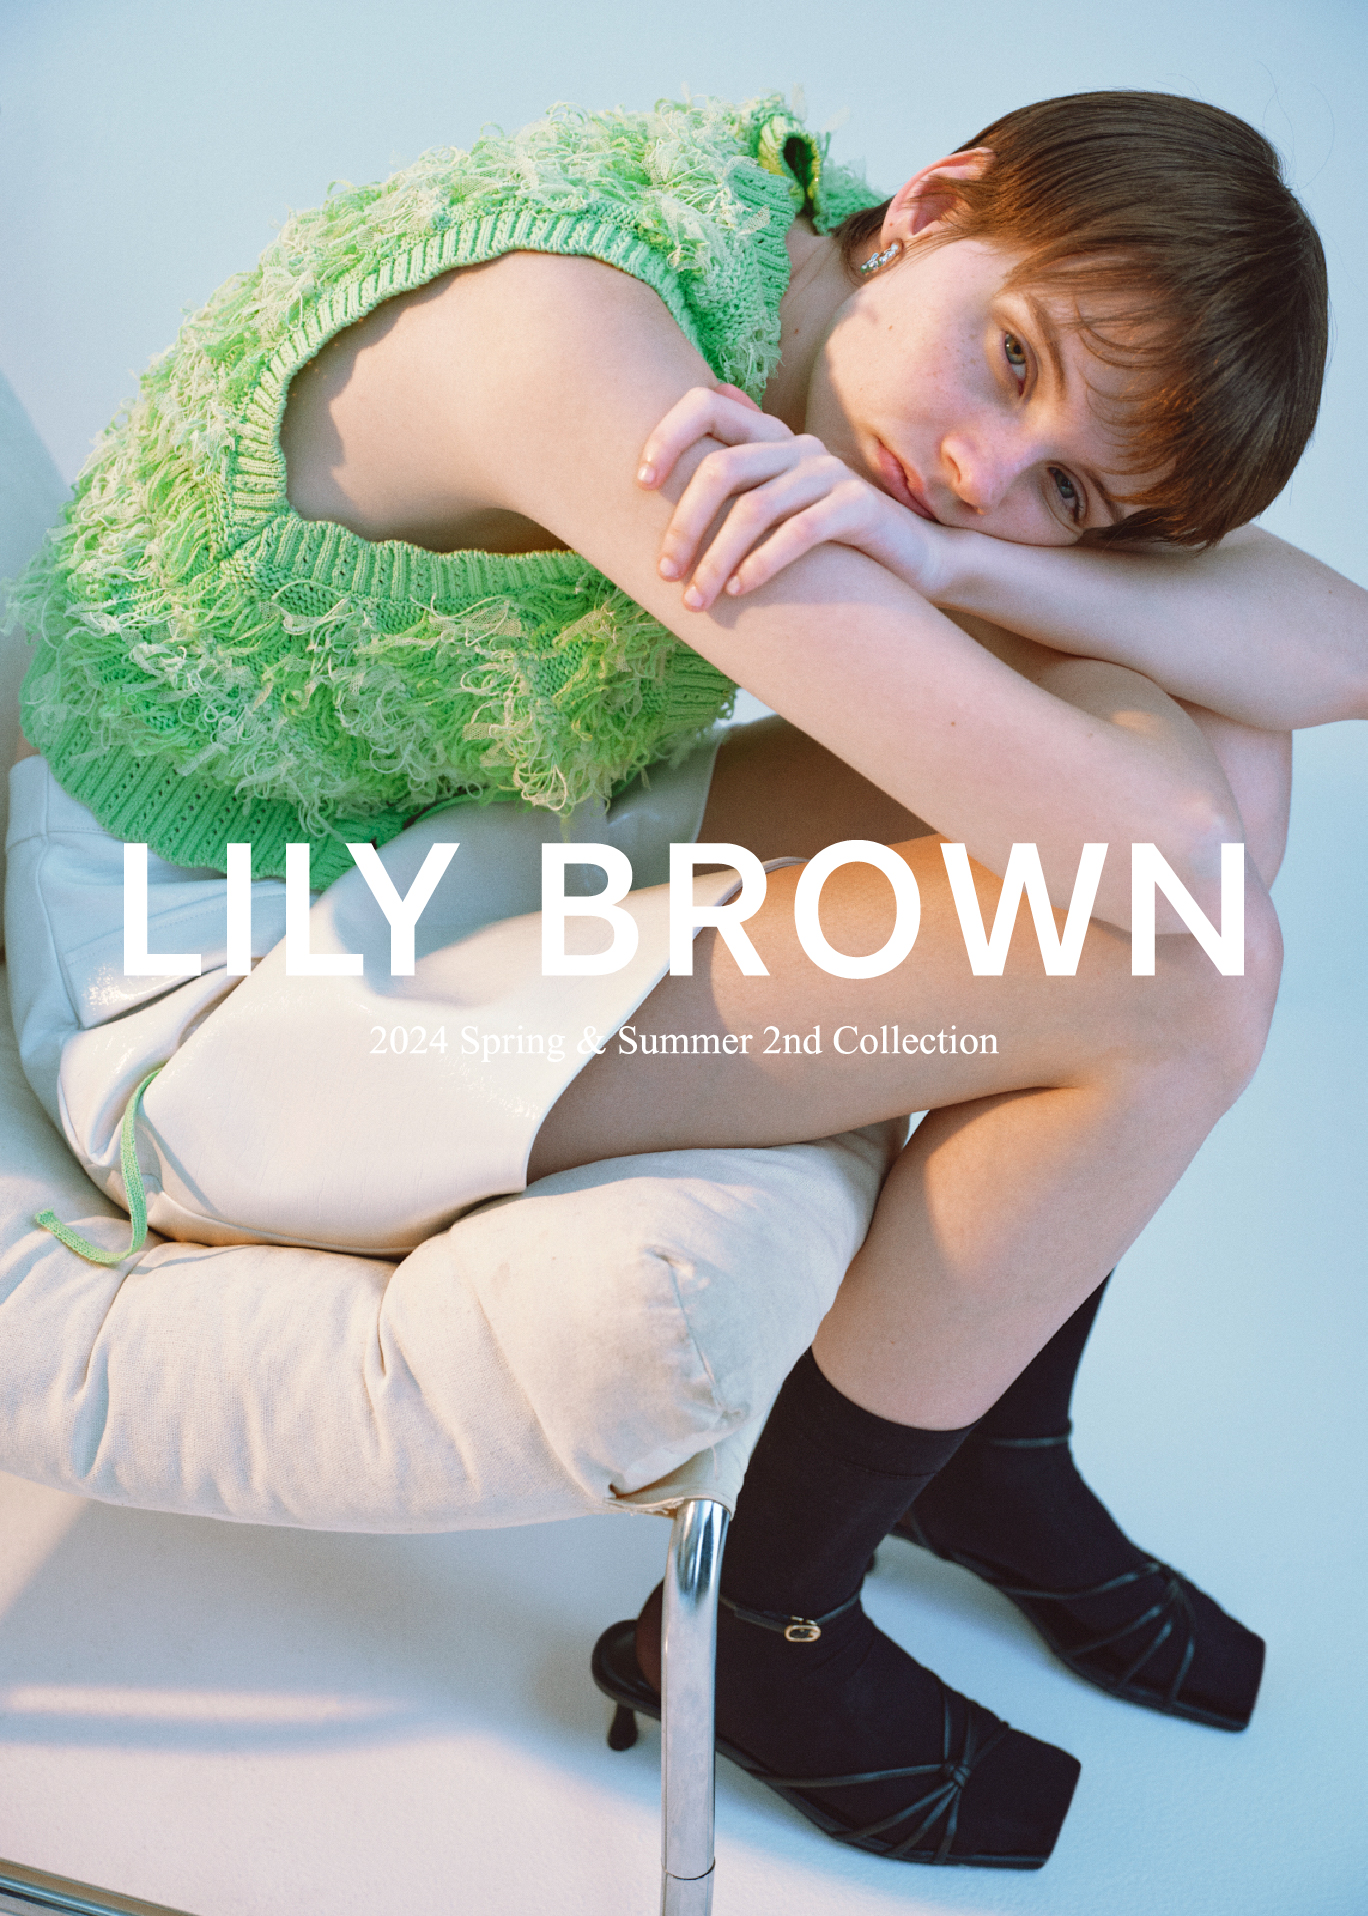 LILY BROWN 2024 Spring & Summer 2nd Collection